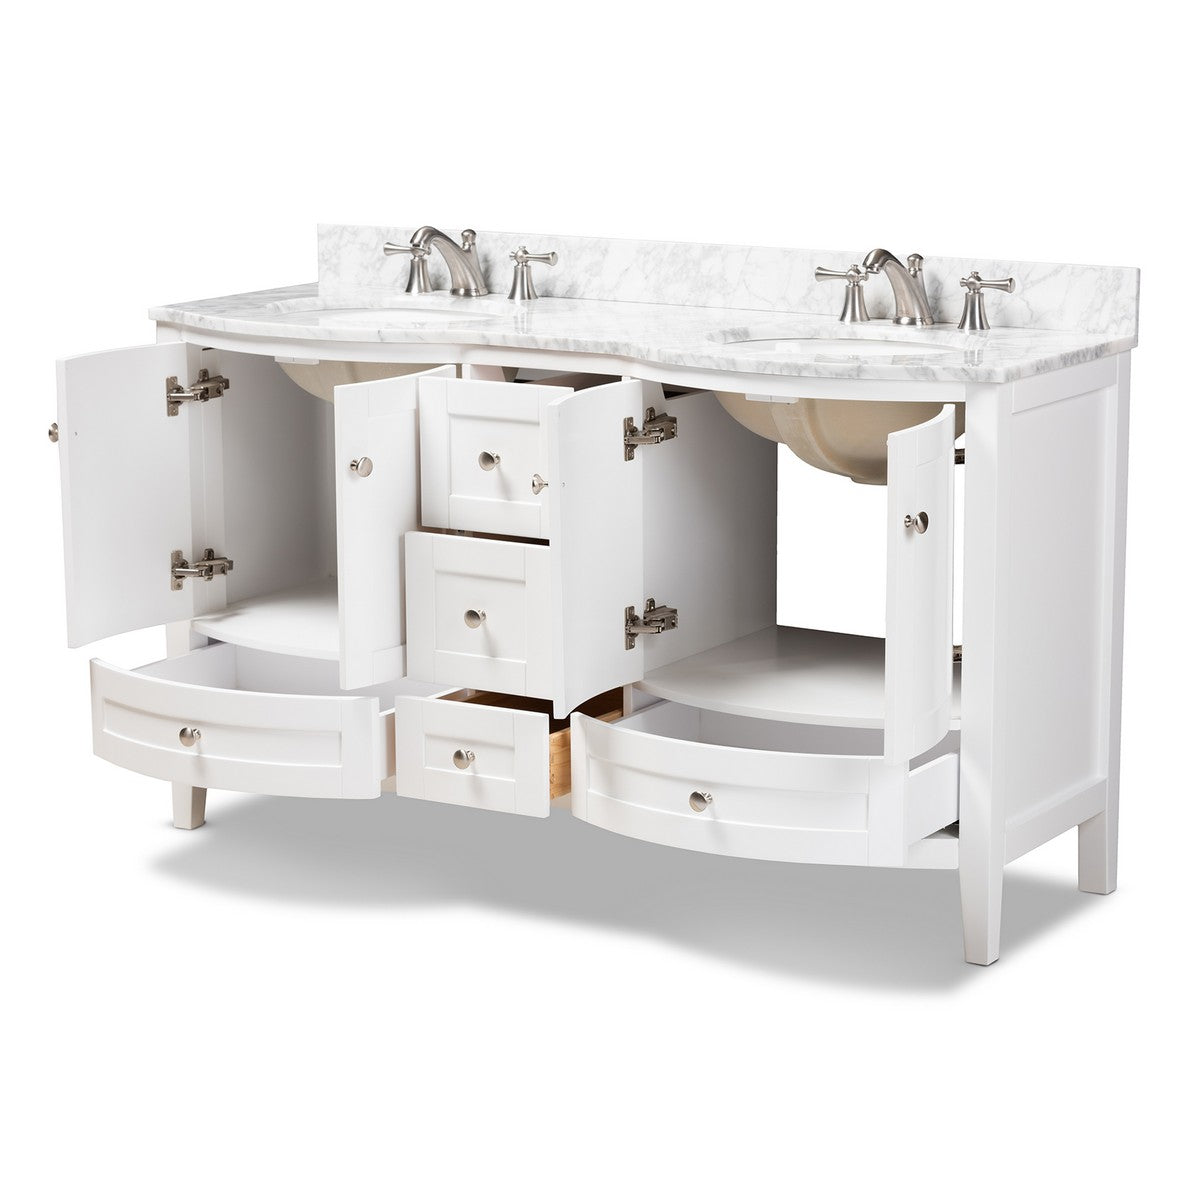 Baxton Studio Nicole 60-Inch Transitional White Finished Wood and Marble Double Sink Bathroom Vanity